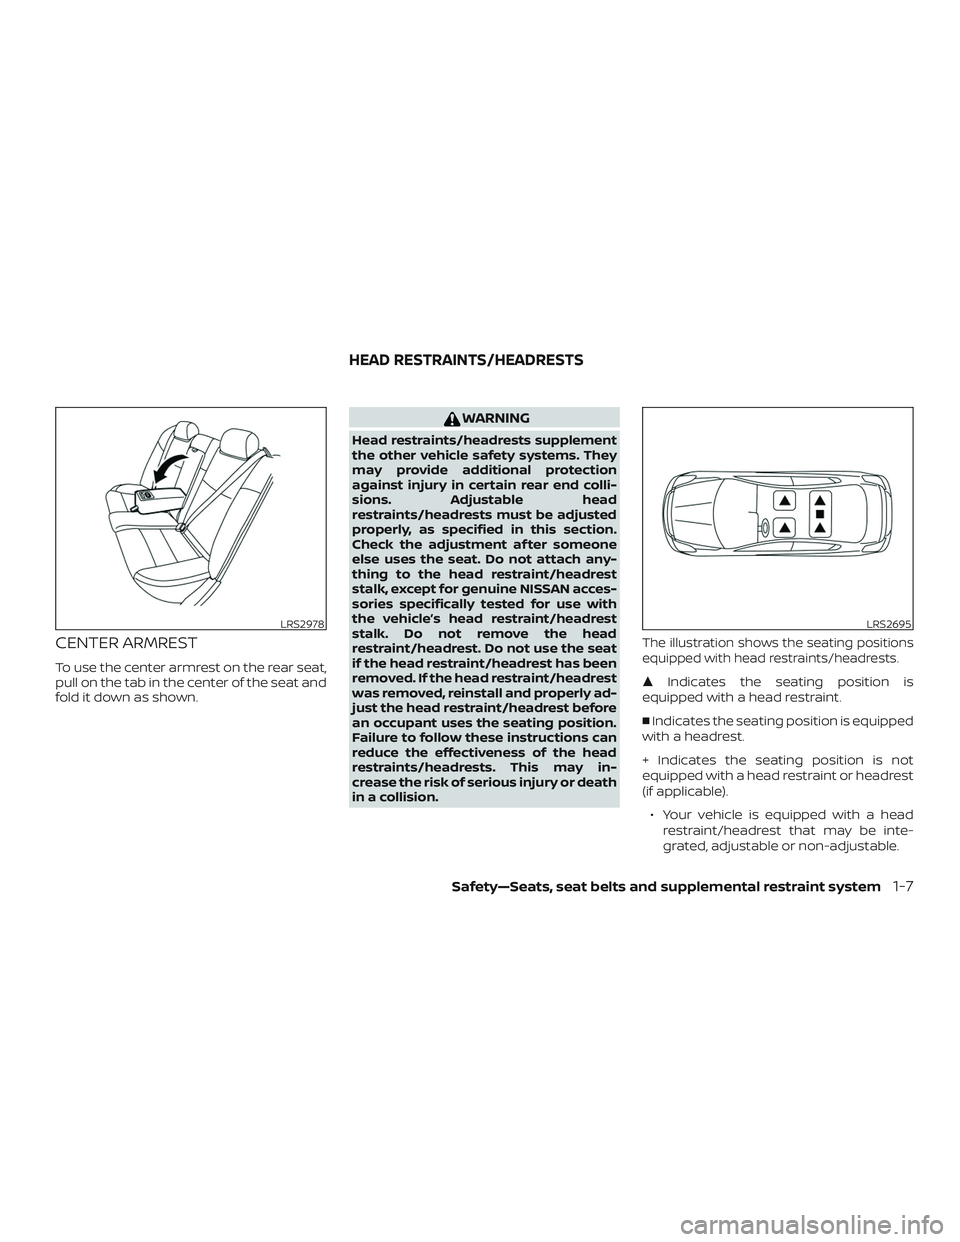 NISSAN MAXIMA 2020  Owner´s Manual CENTER ARMREST
To use the center armrest on the rear seat,
pull on the tab in the center of the seat and
fold it down as shown.
WARNING
Head restraints/headrests supplement
the other vehicle safety sy